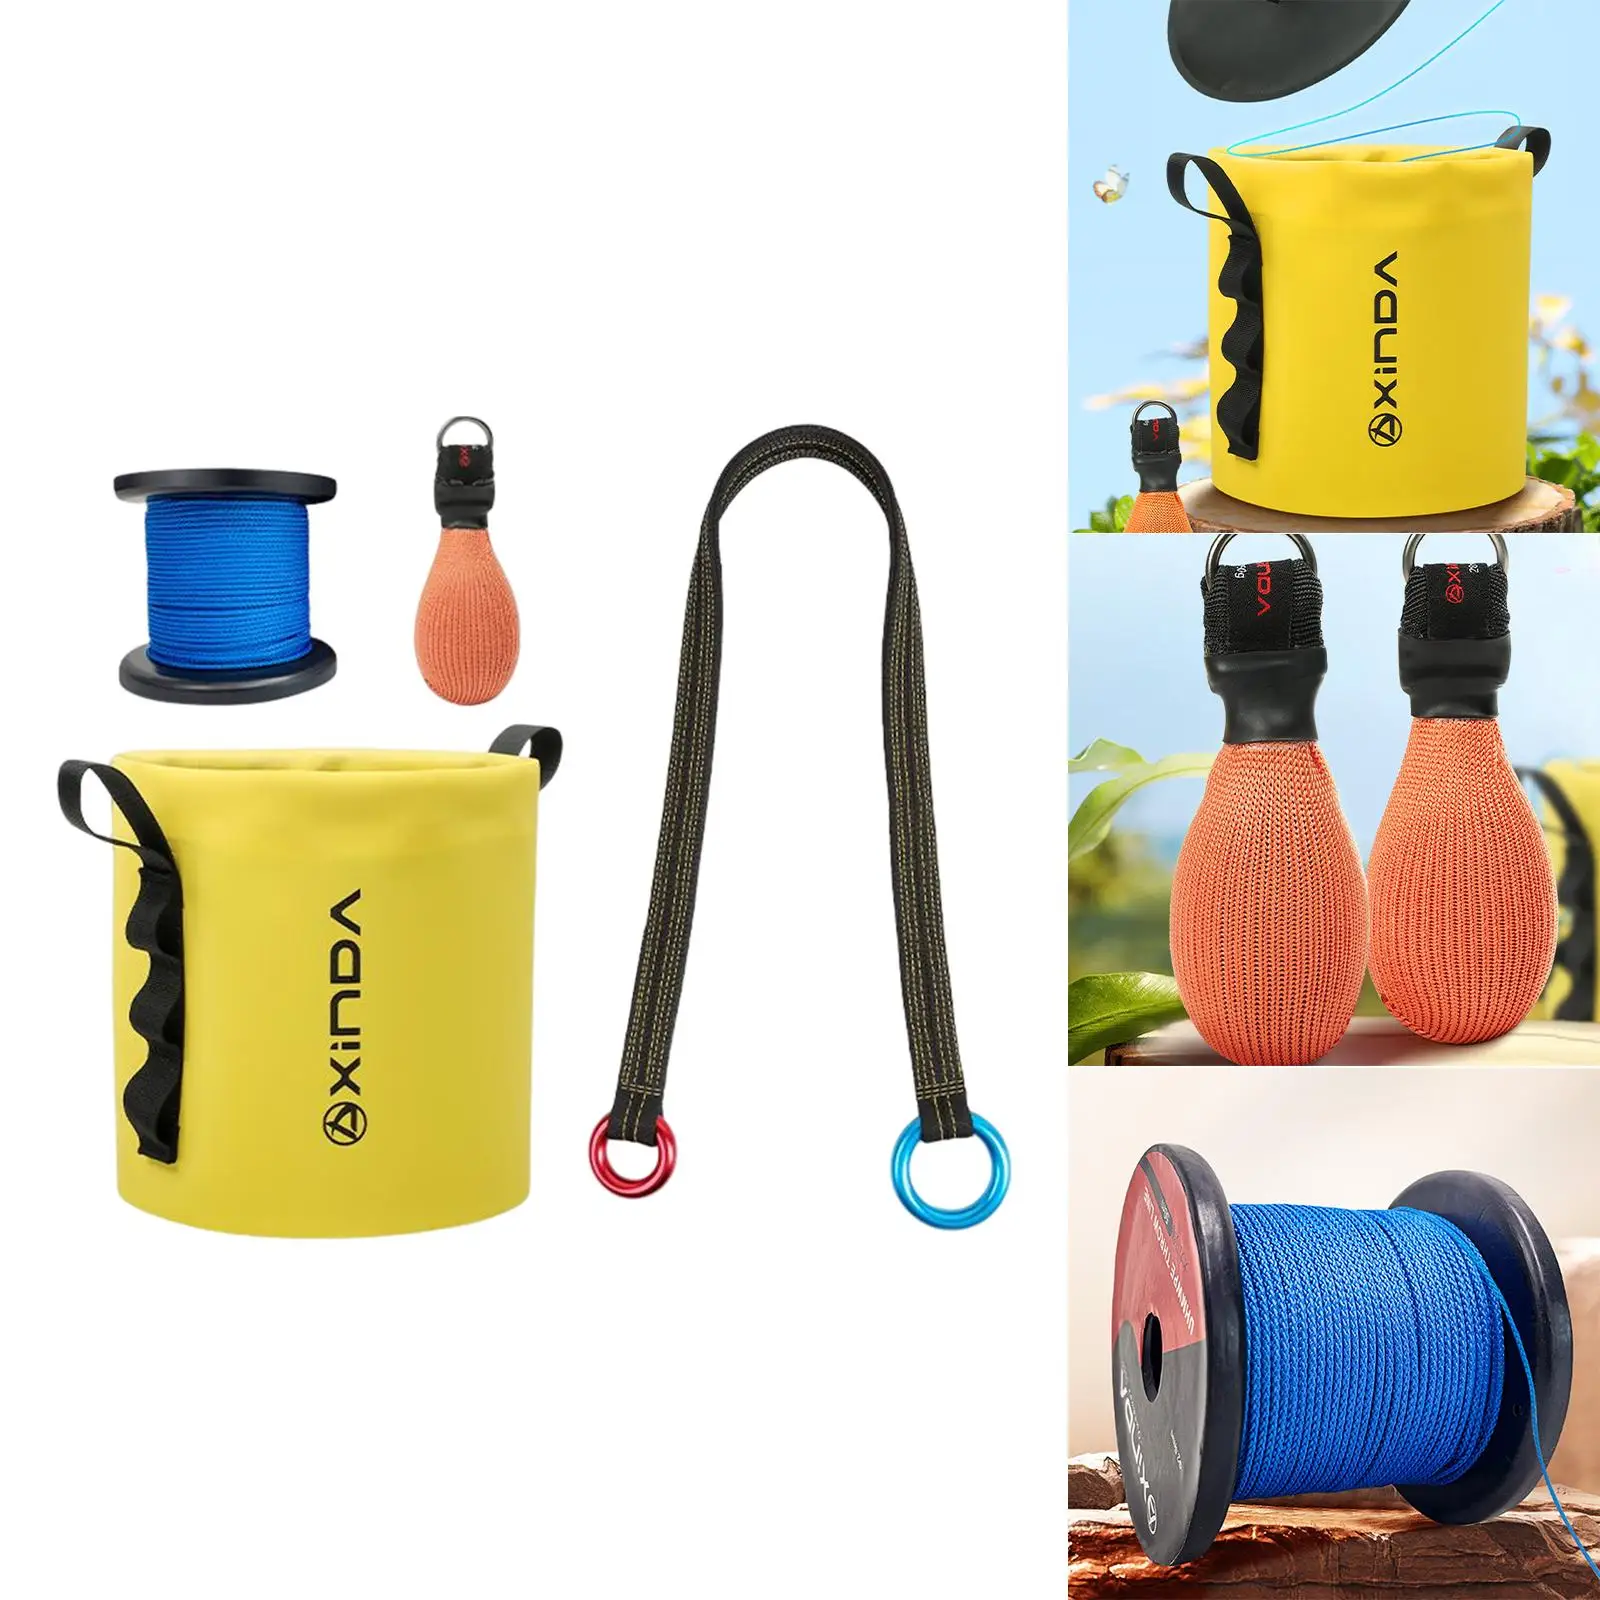 4x Arborist Throw Line Kit and Rope Storage Bag Straps Throw Weight Portable Durable Throwline for Outdoor Sports Backpacking